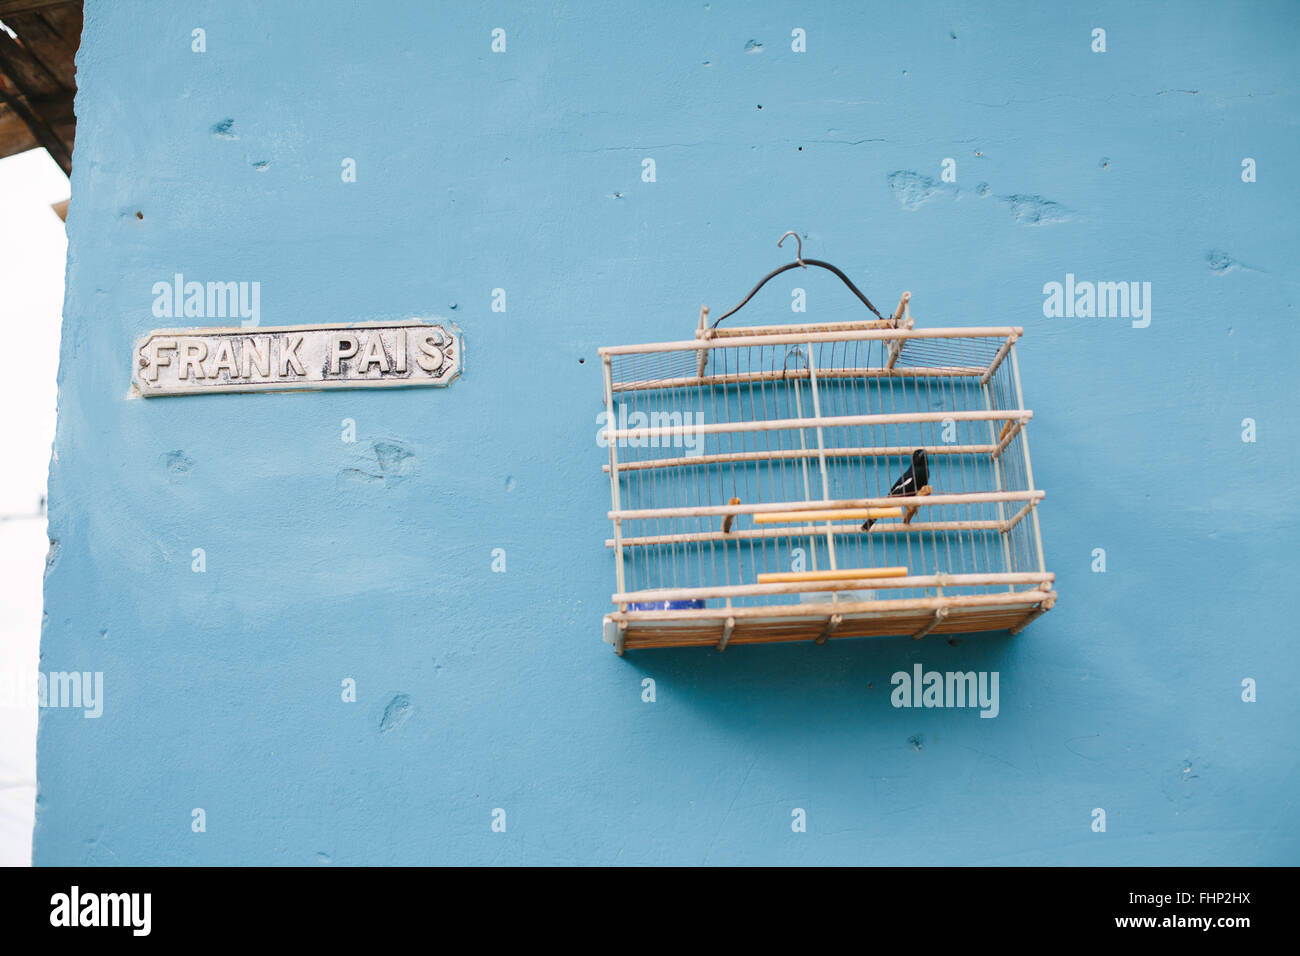 A caged bird hangs on the blue wall next to the street sign for Frank Pais in Trinidad, Cuba Stock Photo